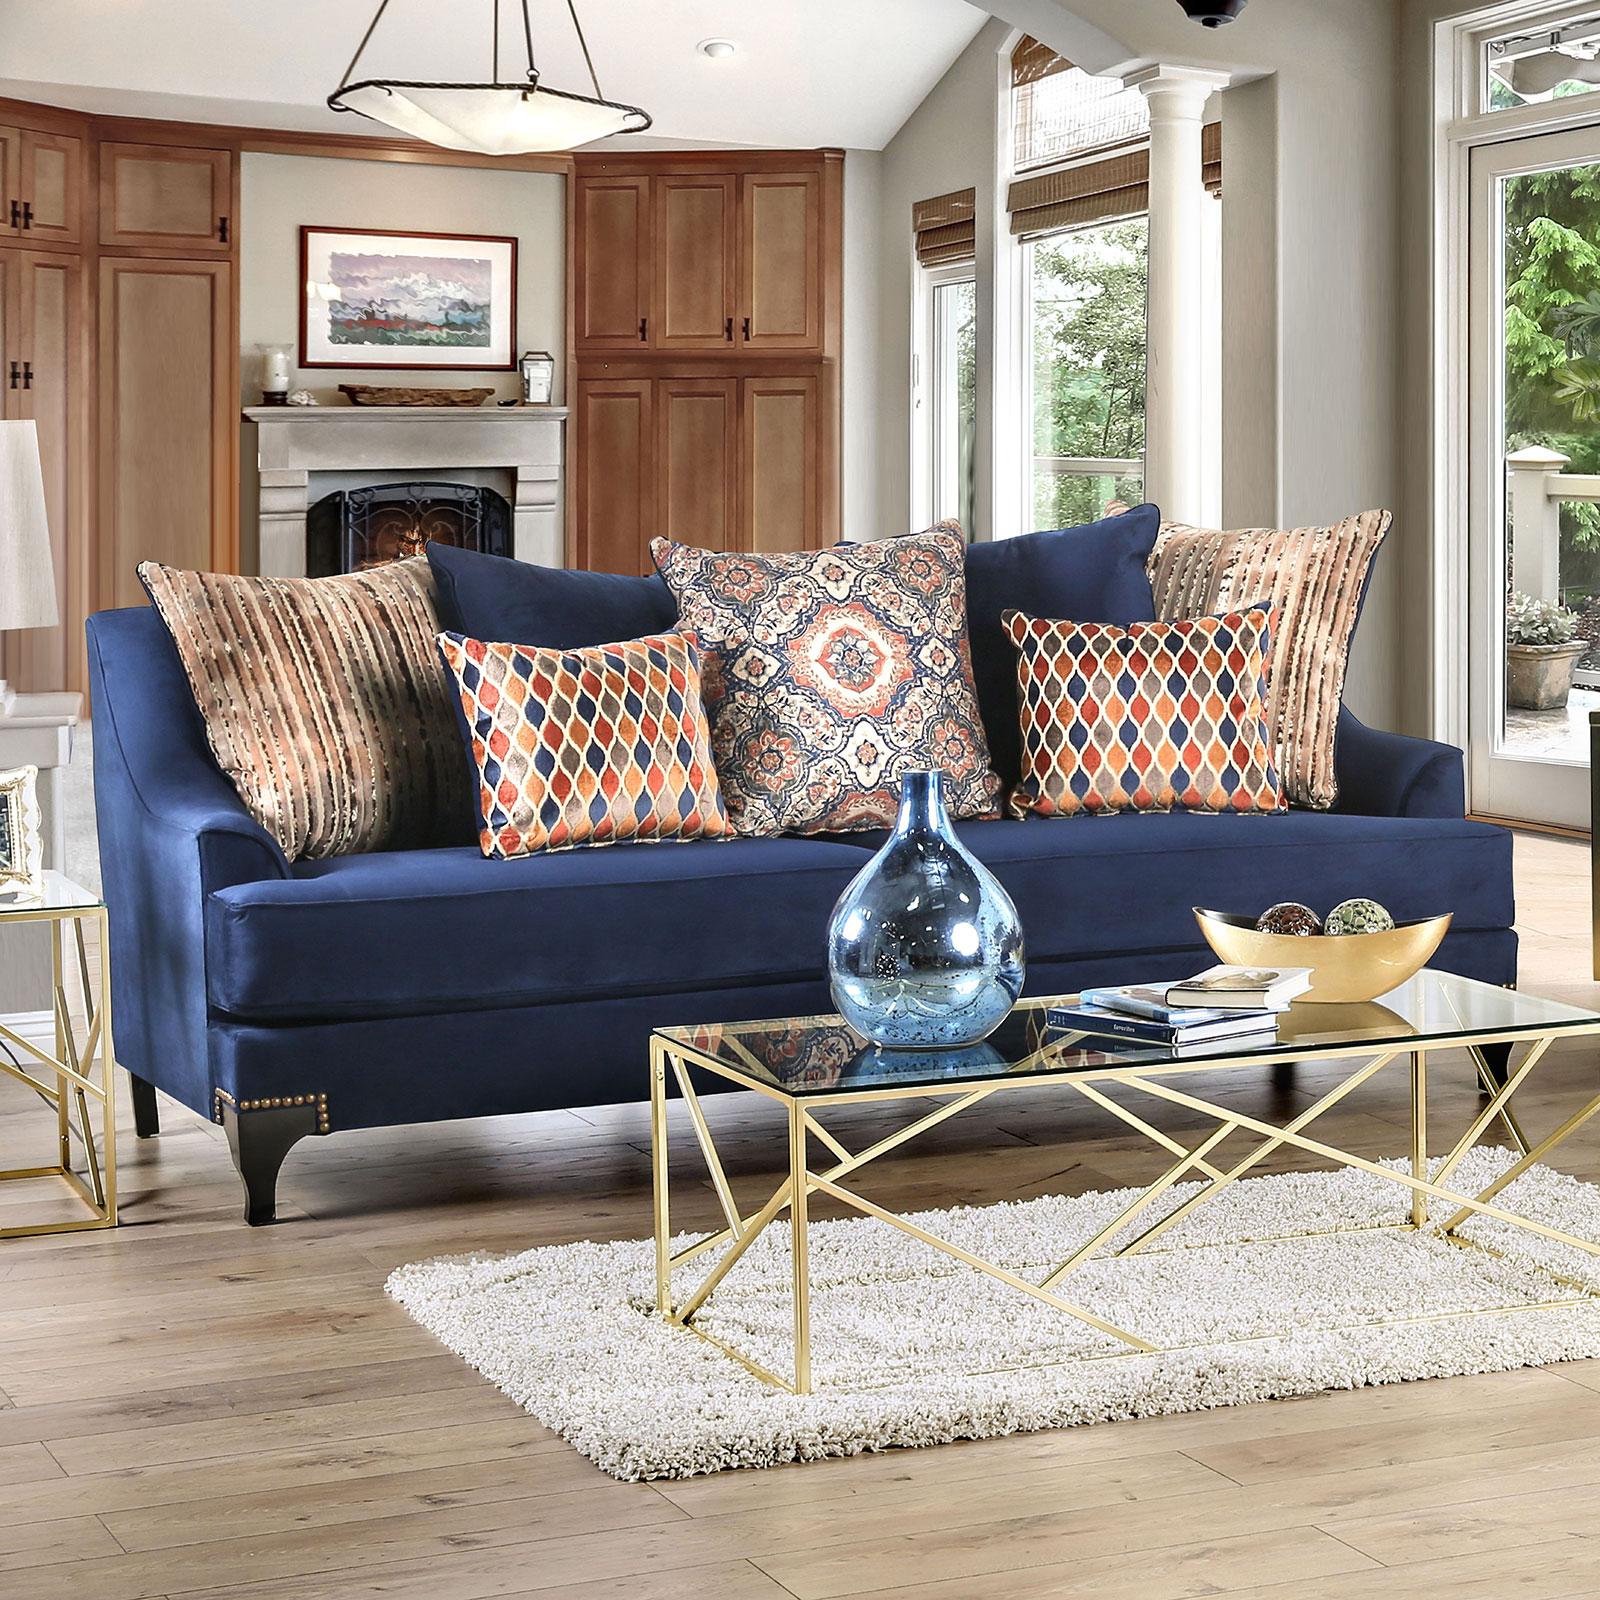 Transitional Sofa SISSETON SM2210-SF SM2210-SF in Navy Chenille